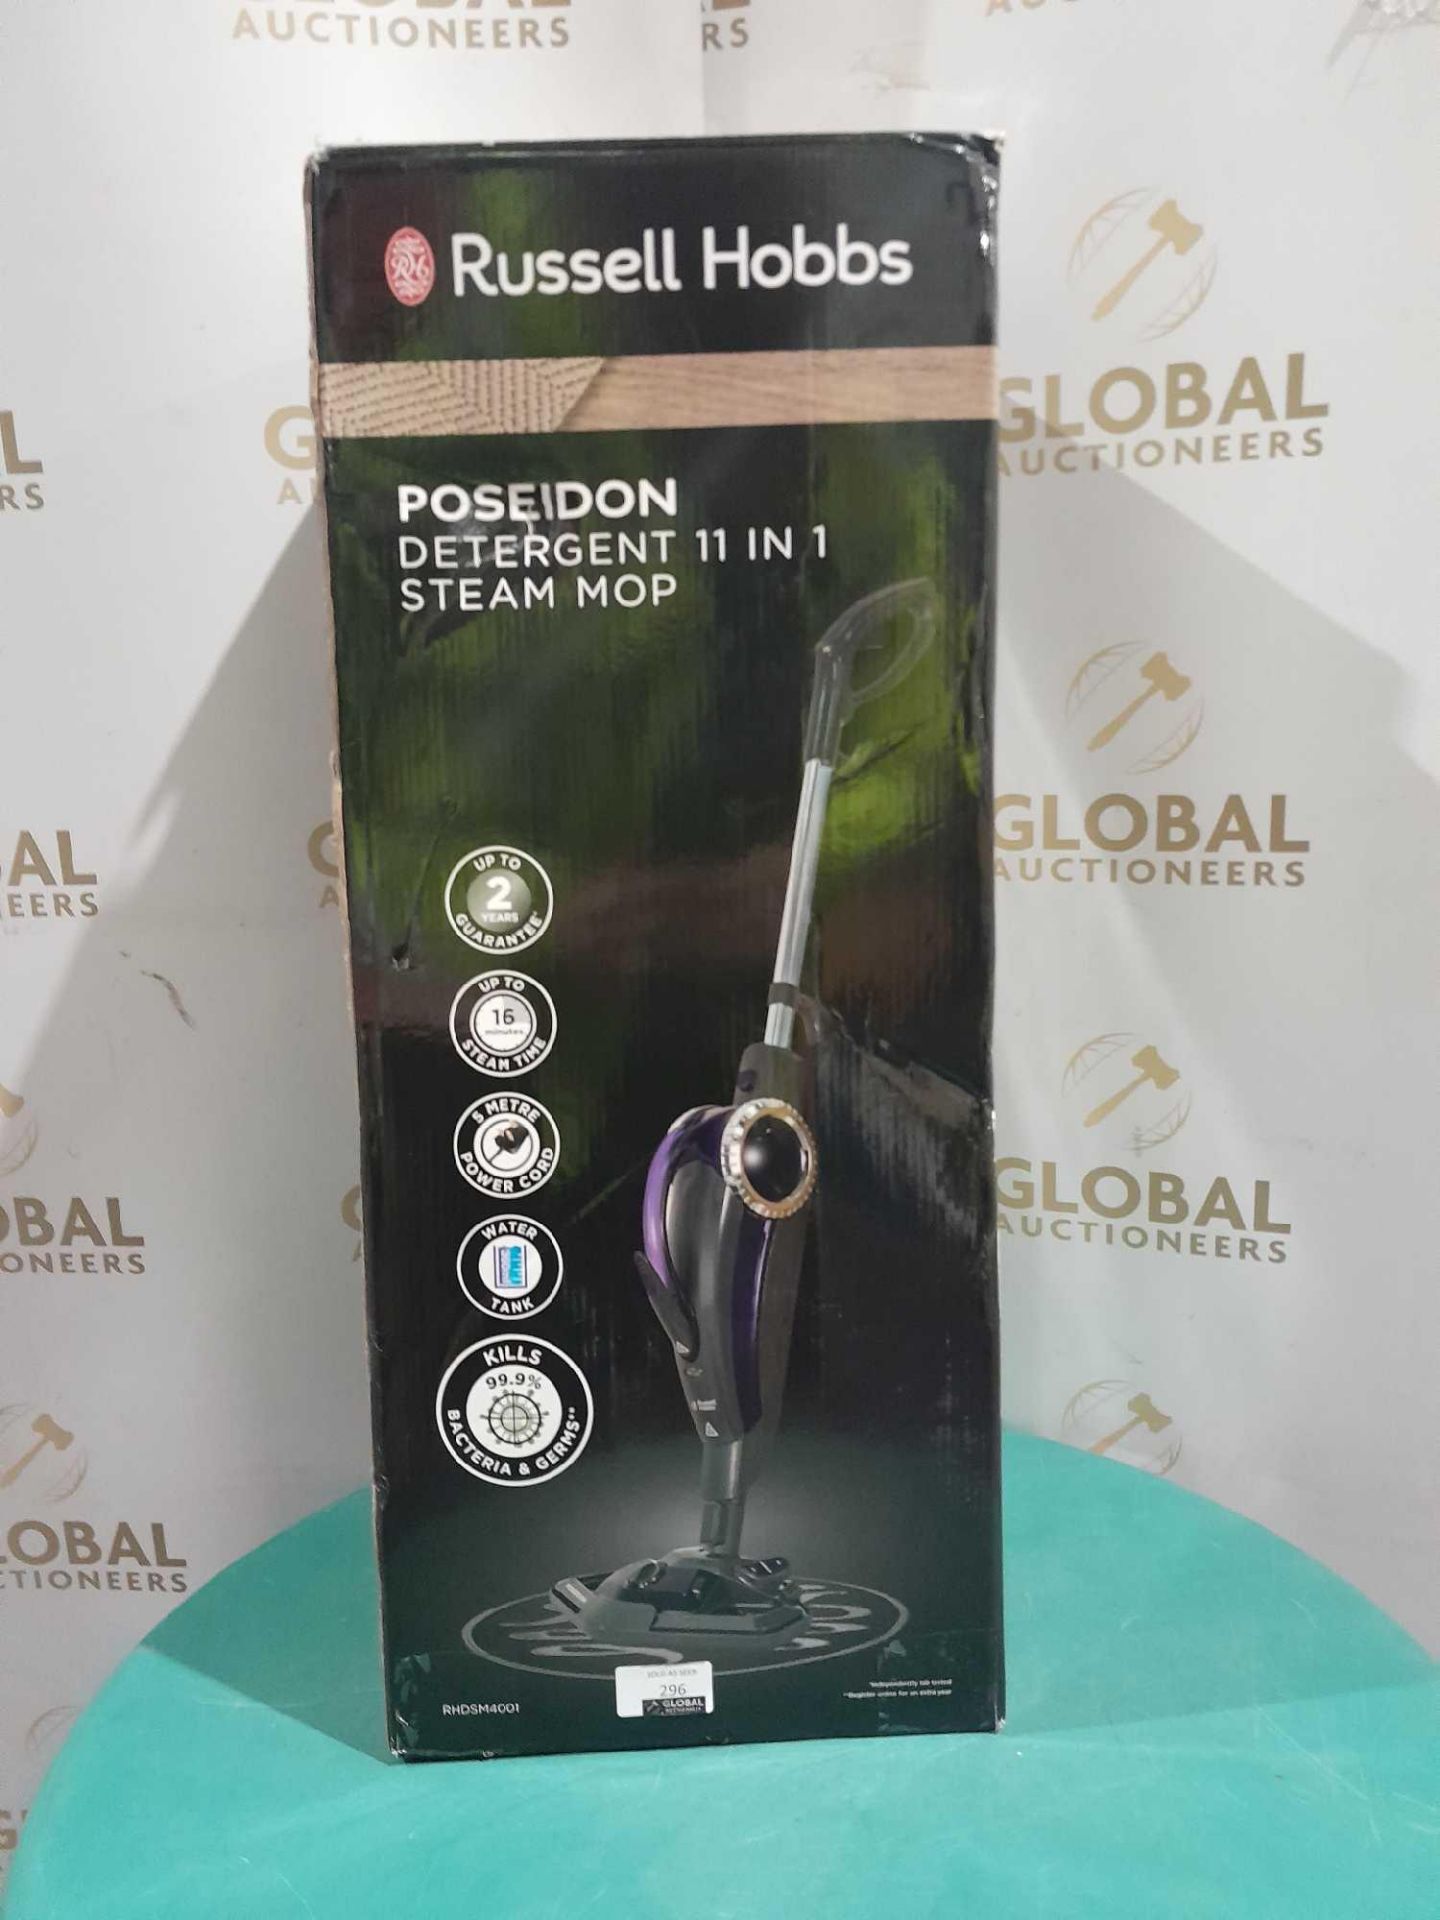 RRP £100 Boxed Russell Hobbs Poseidon Detergent 11 In 1 Steam Mop - Image 2 of 2